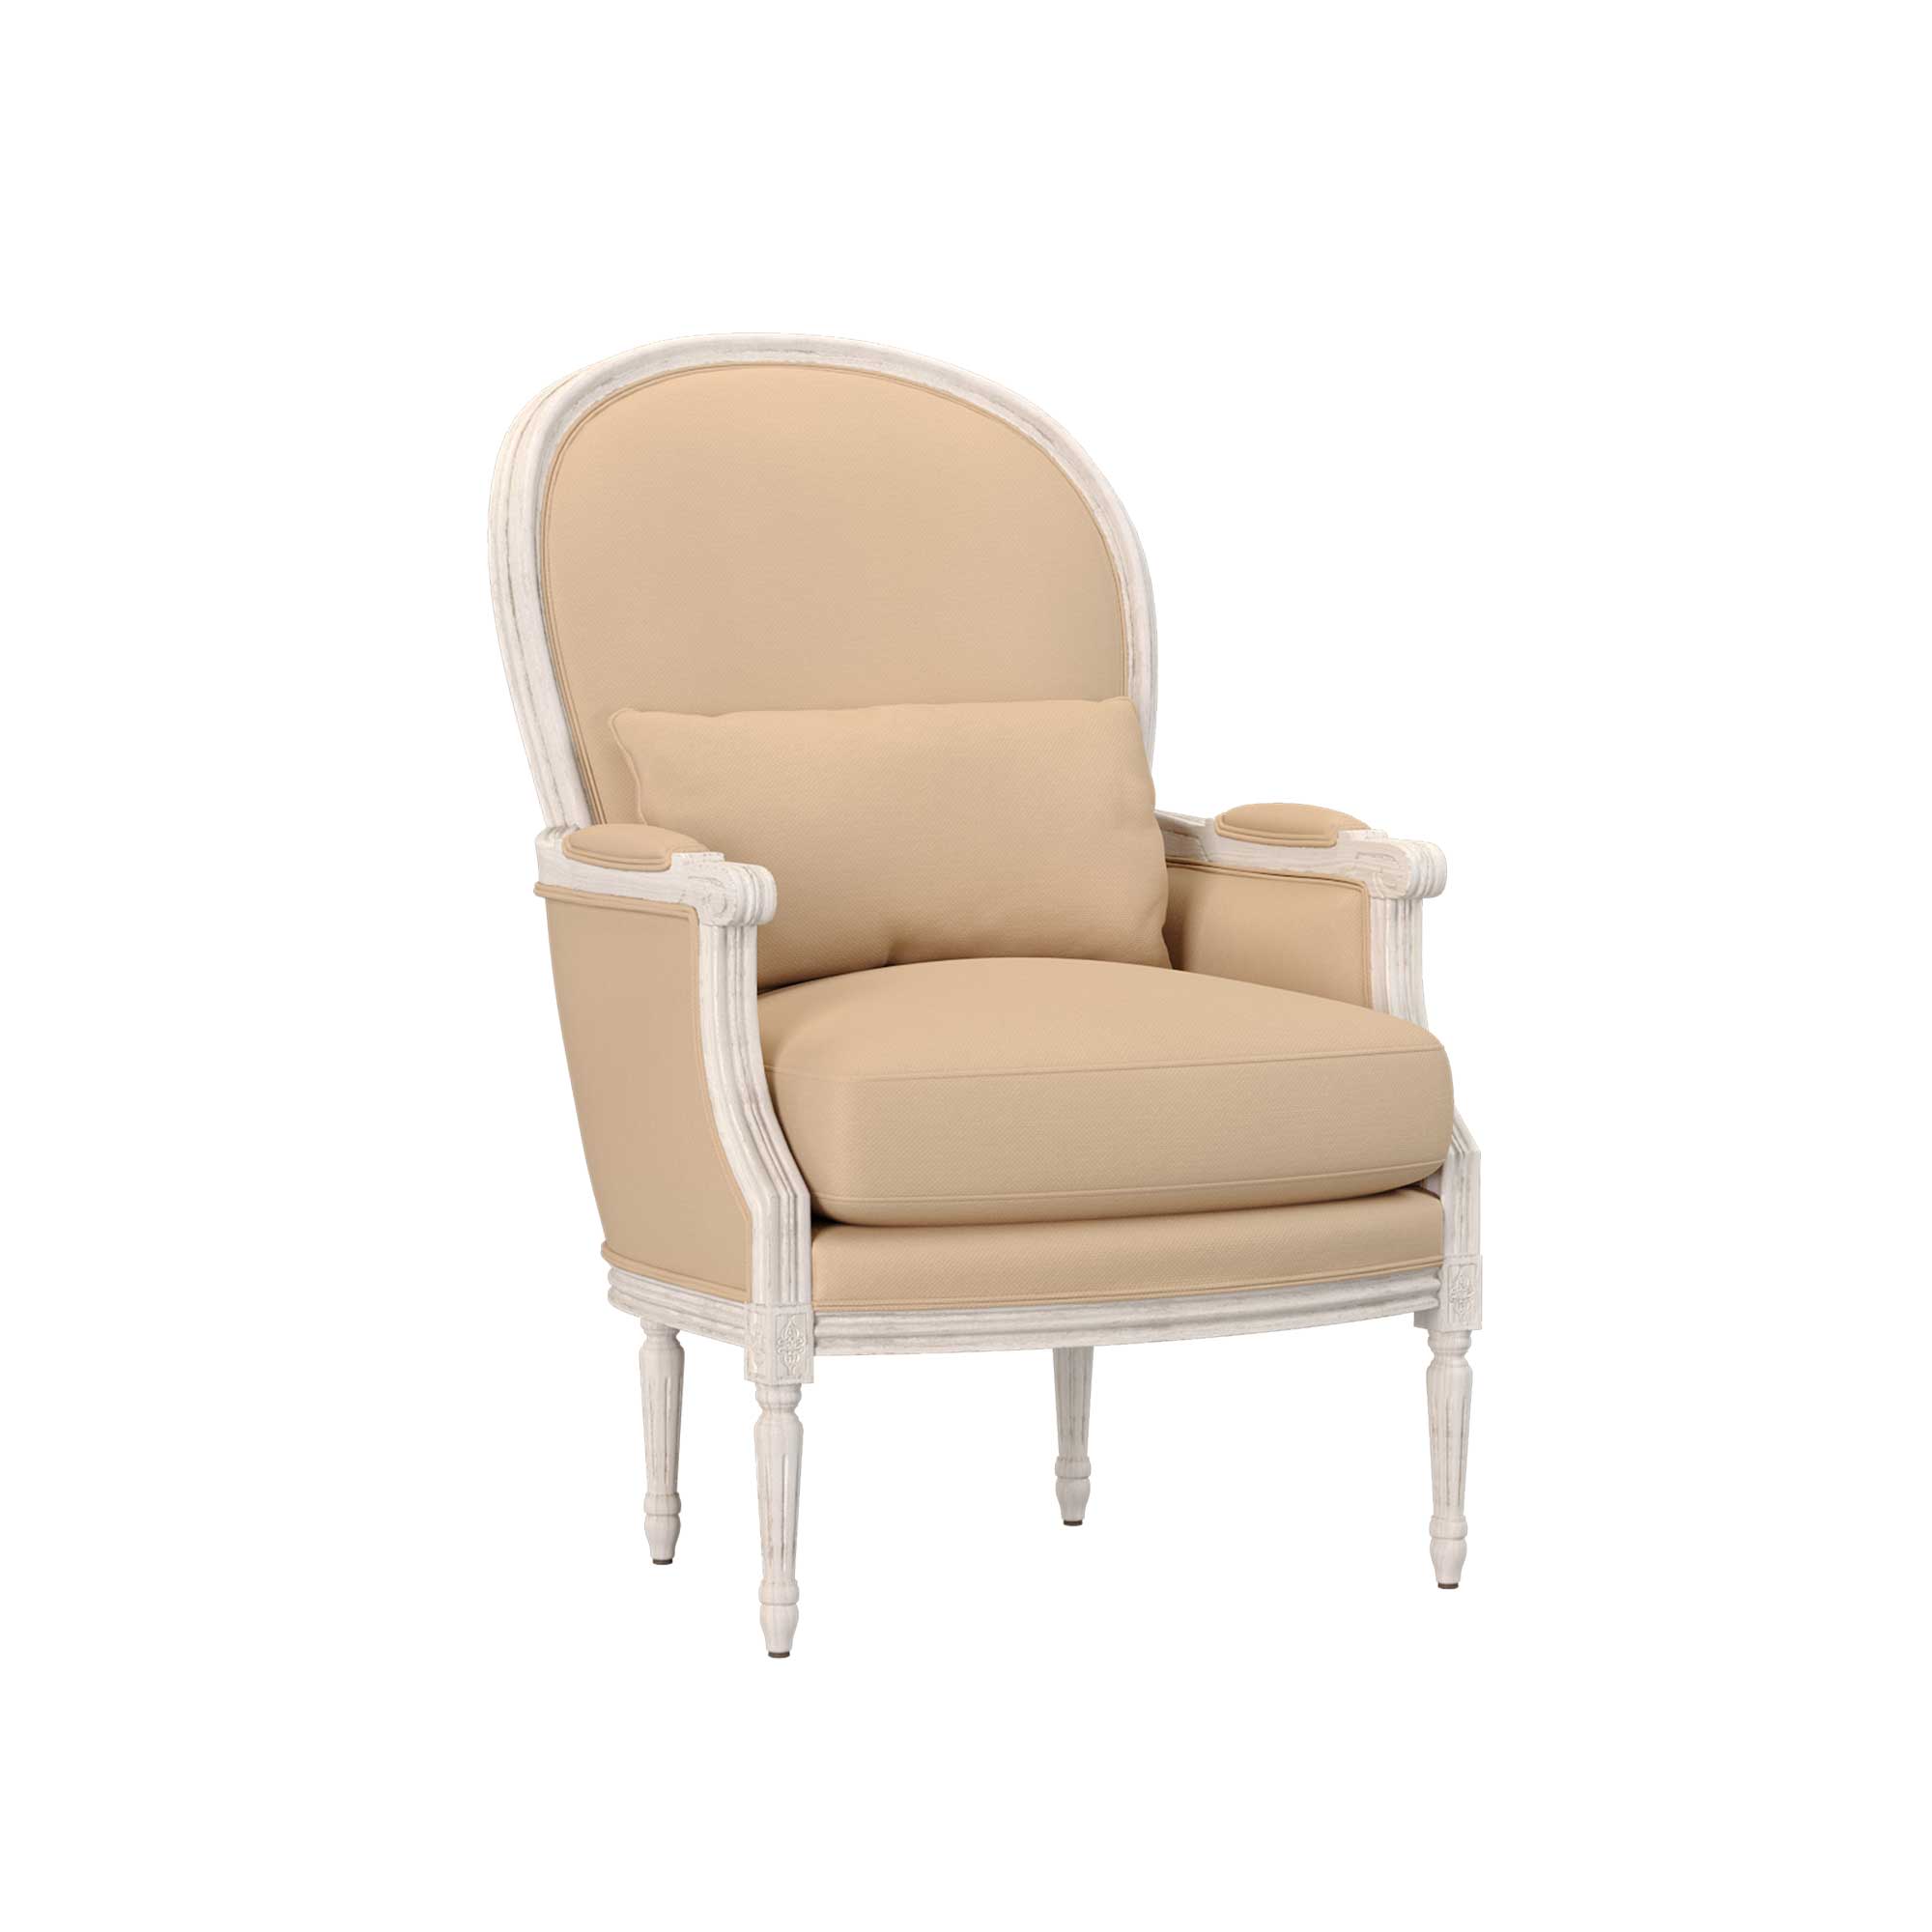 Adele Lounge Chair Upholstered in Bone